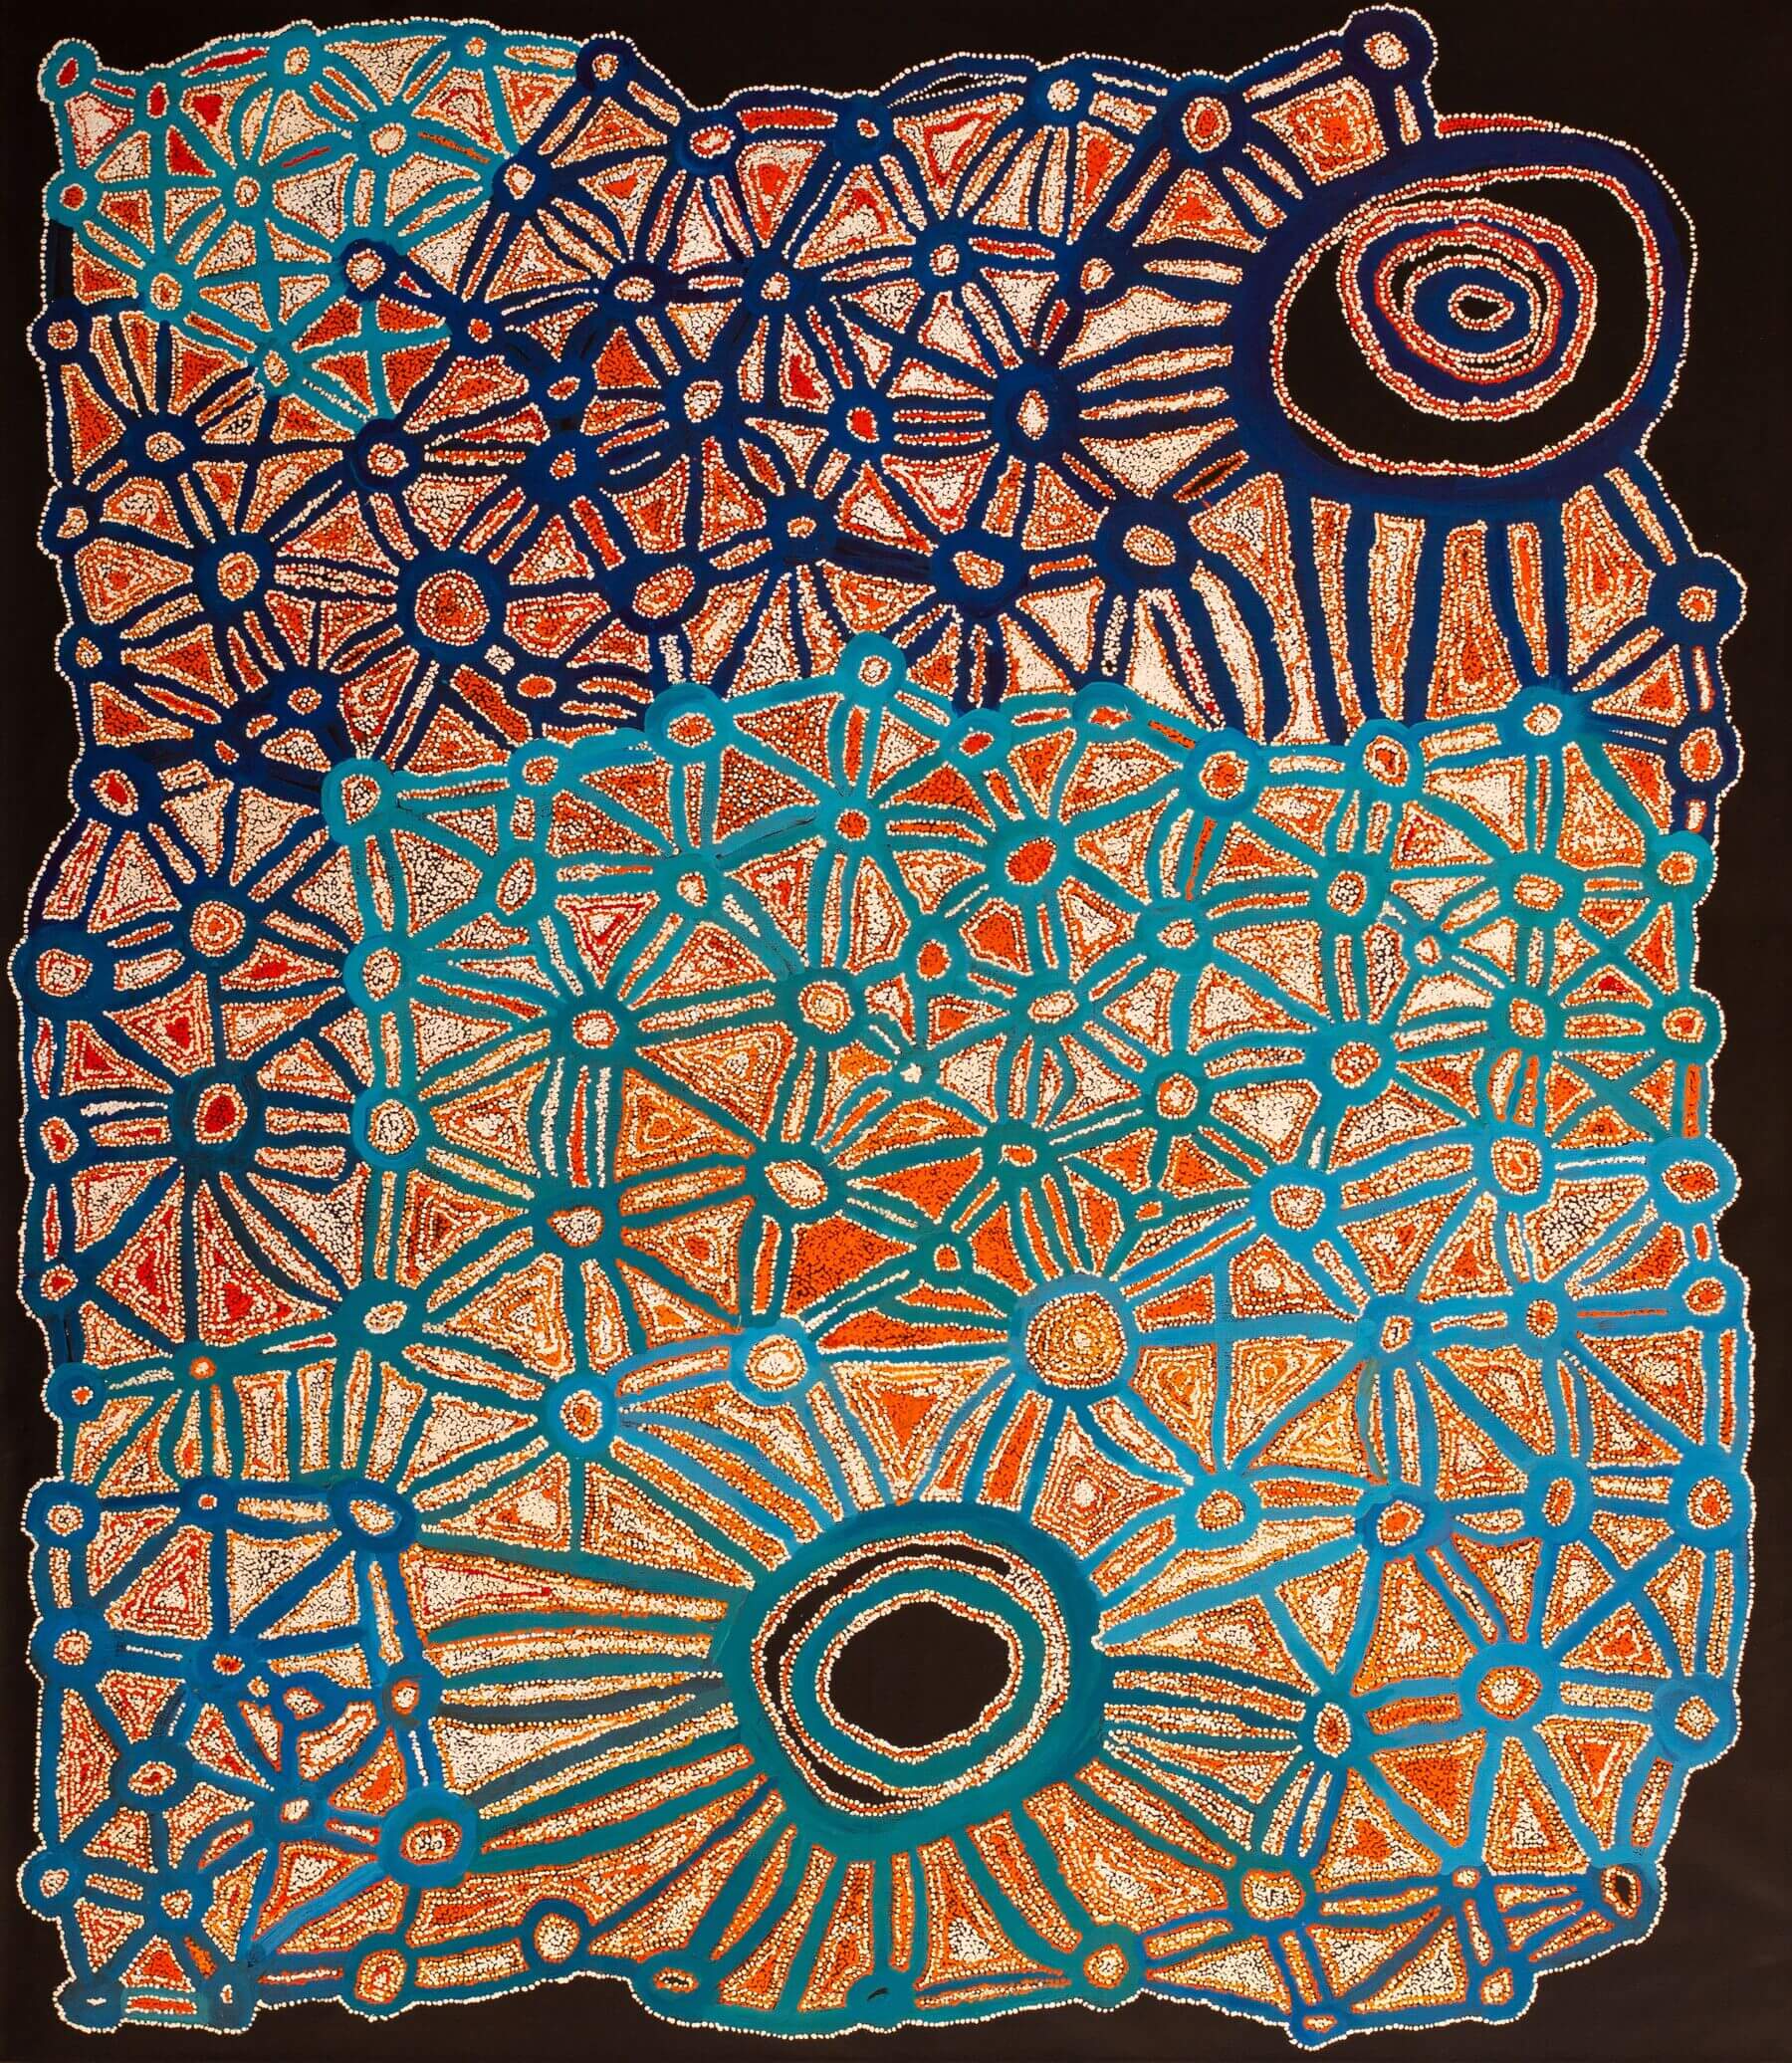 Painting from Spinifex Arts by Aboriginal Artist Fred Grant